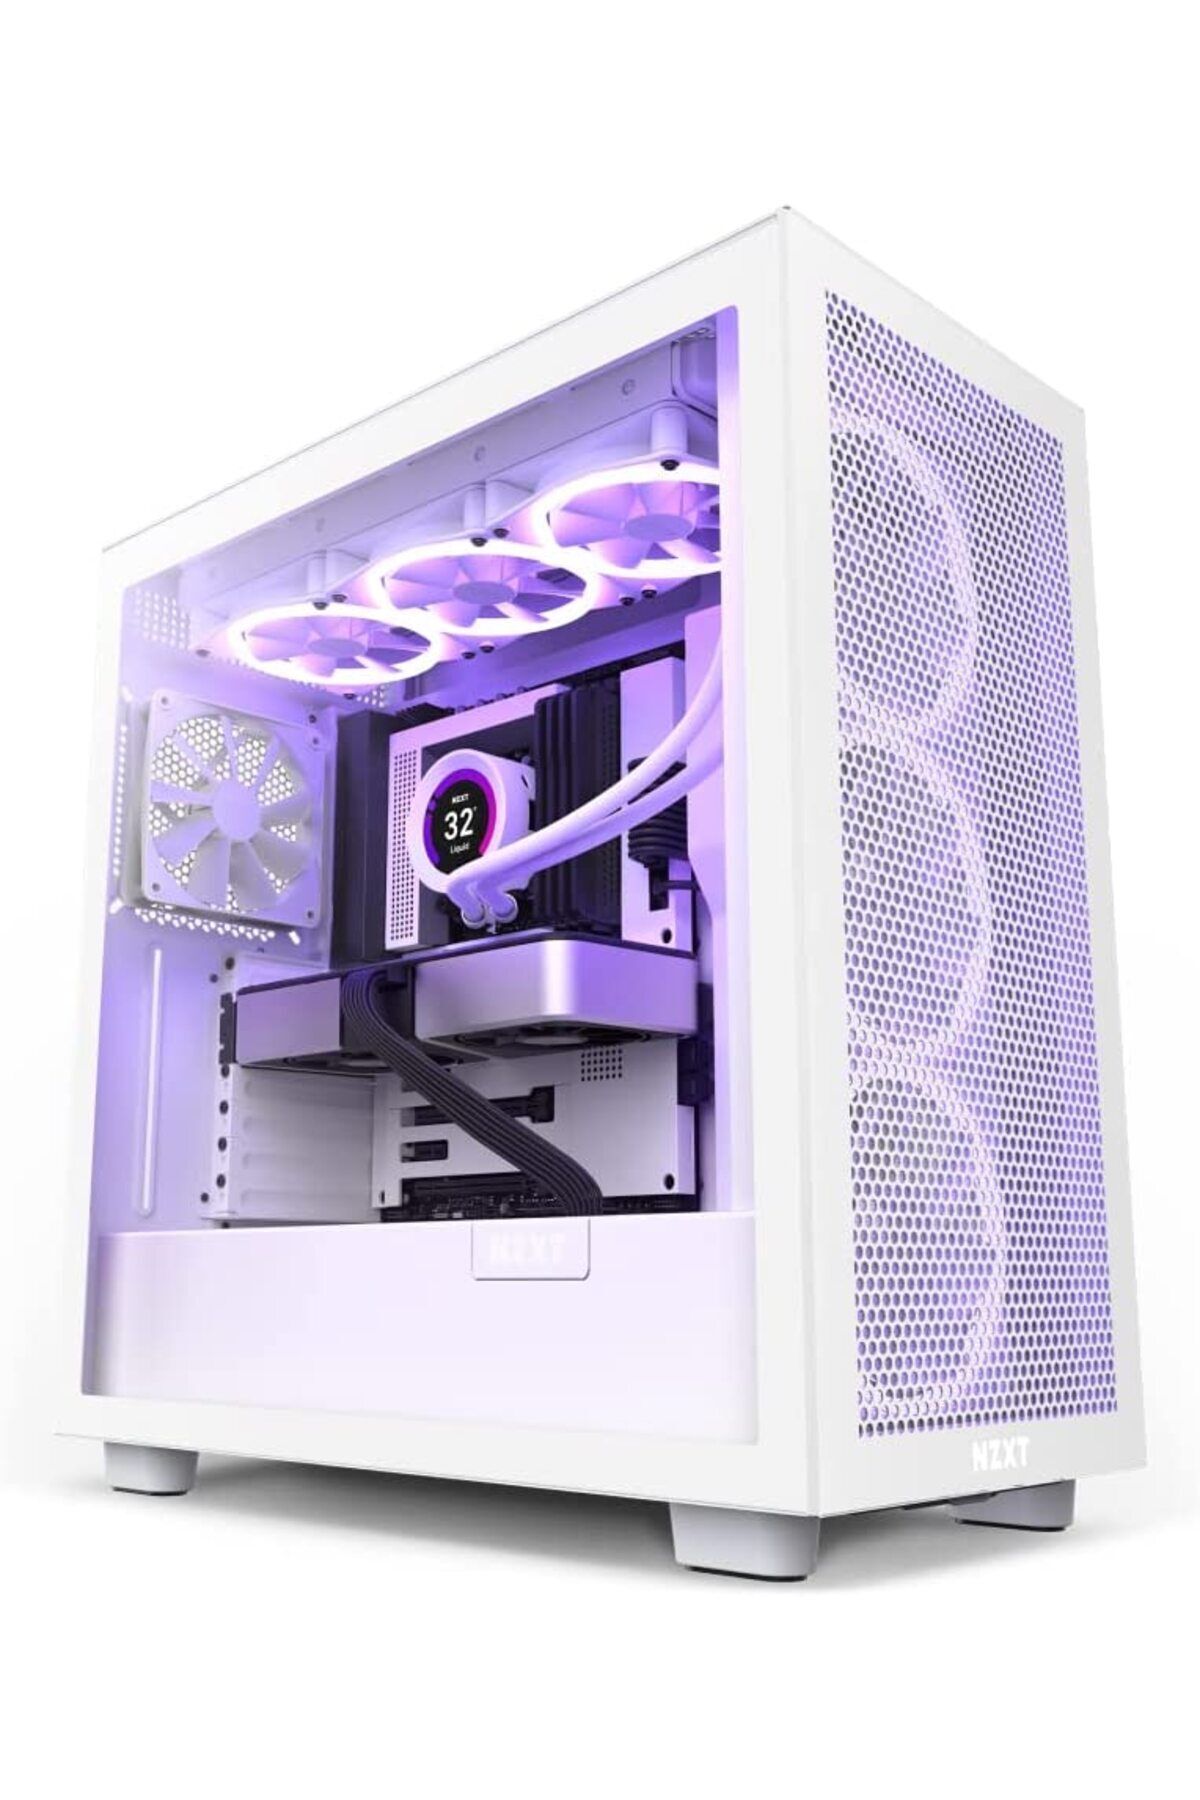 Nzxt Cm-h71fw-01 H Series H710i V1 2022 Flow Edition Atx Mid Tower Beyaz